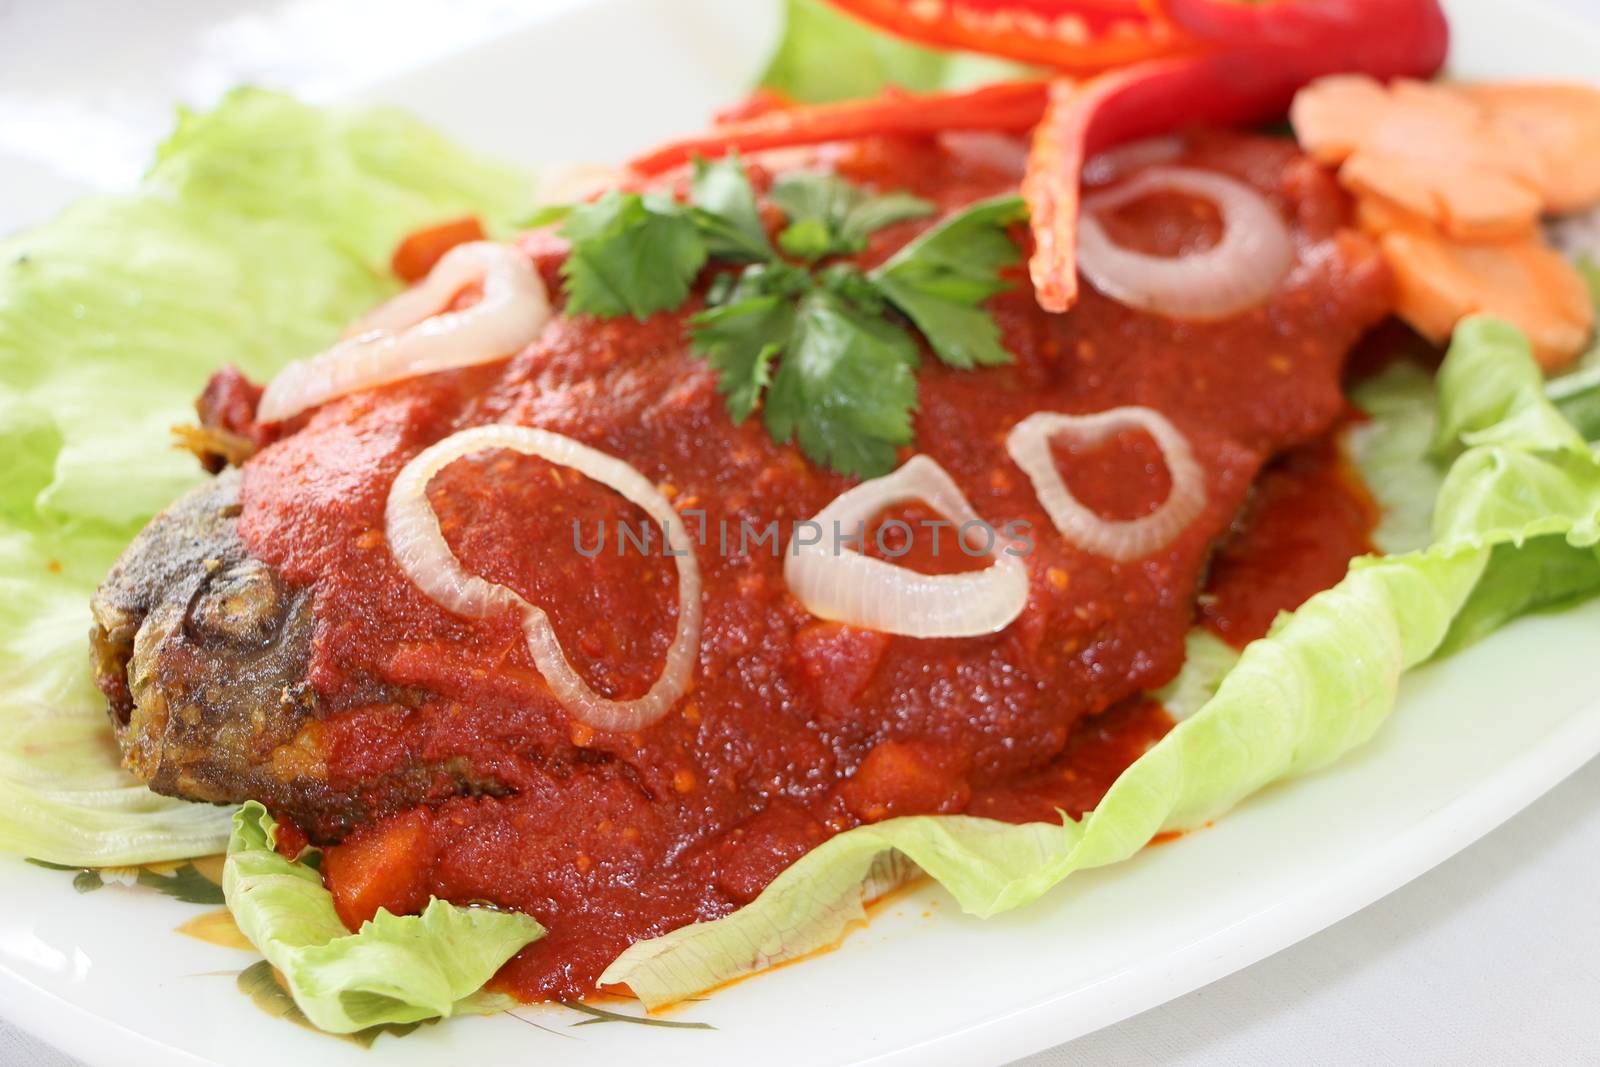 Chili Fish on Plate with Salad